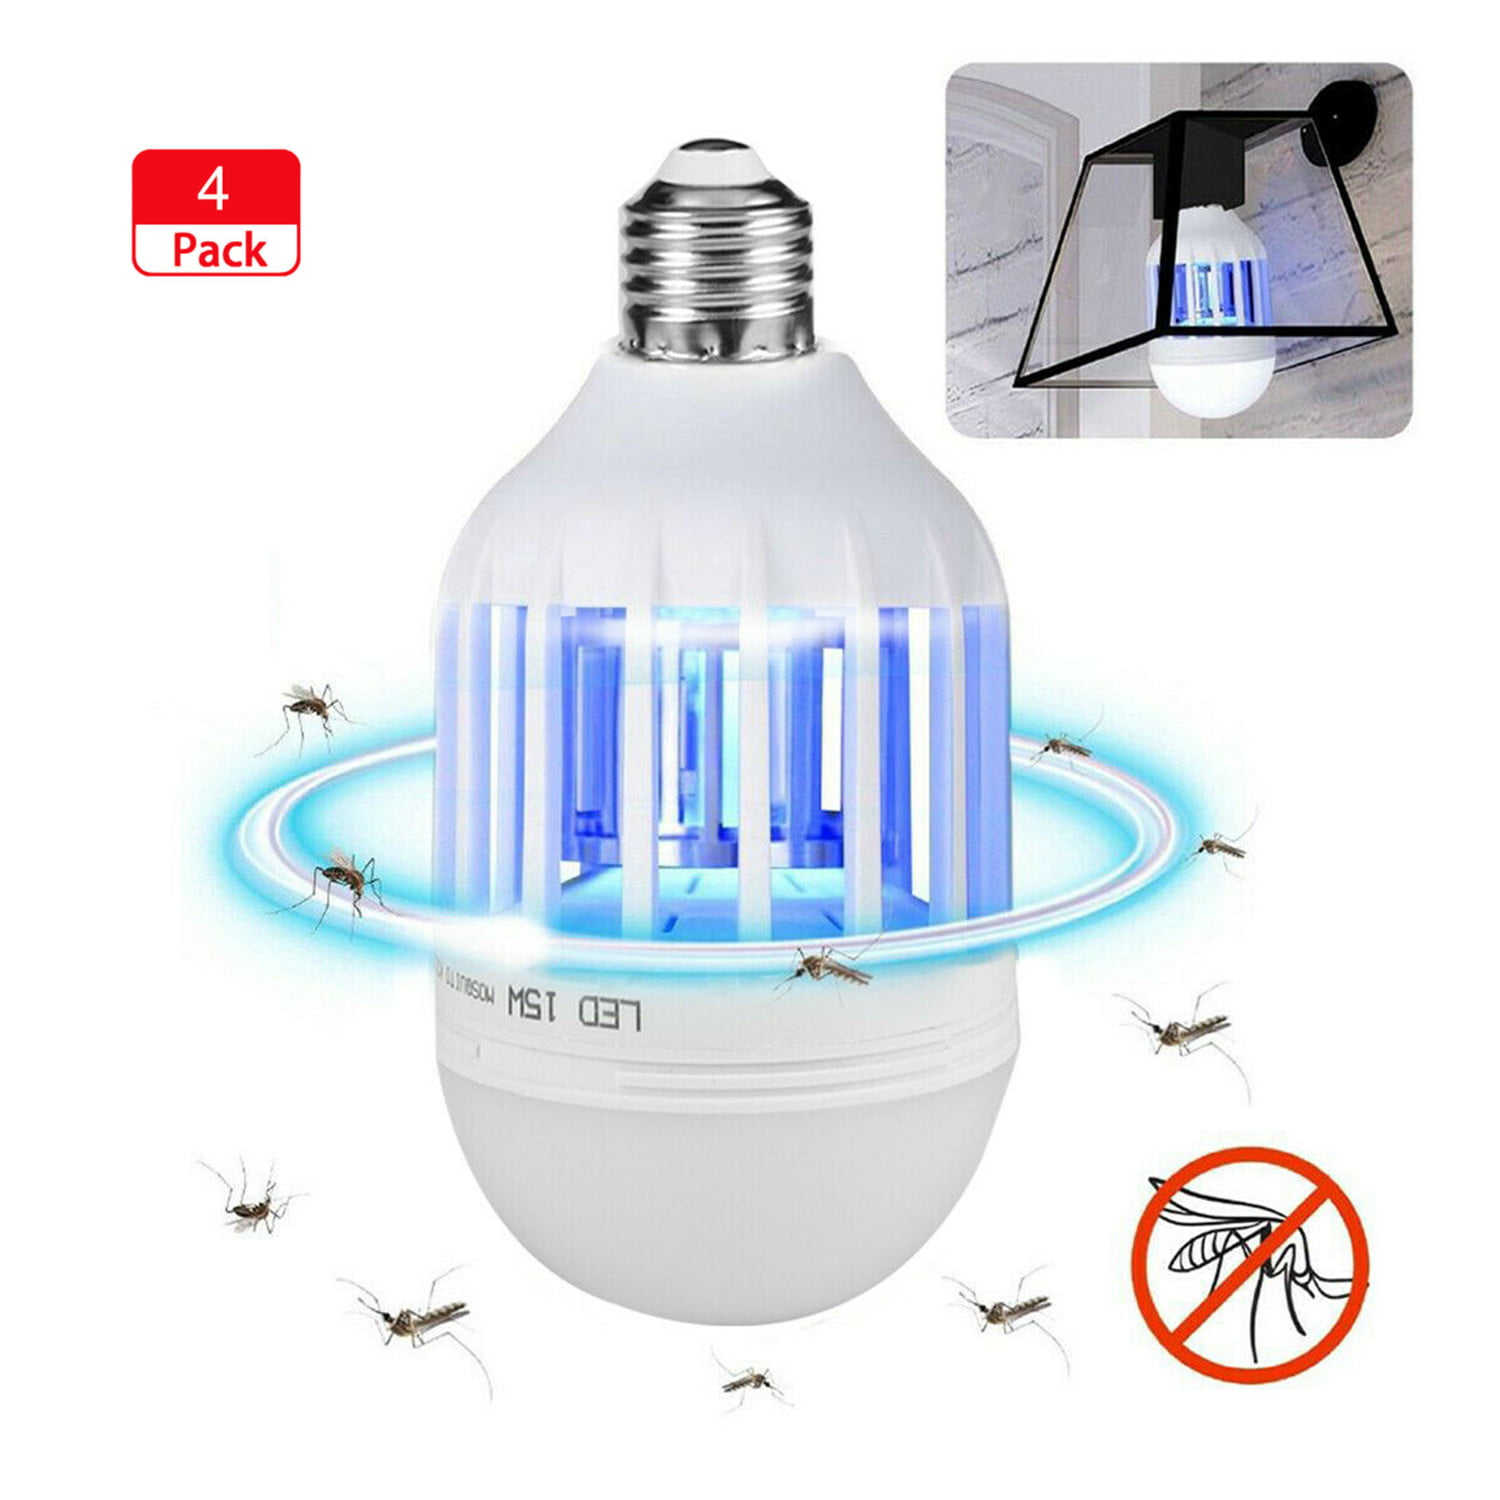 Electric Hand Held Bug Zapper Insect Zapper Fly Swatter Racket Mosquito Kil C3R7 